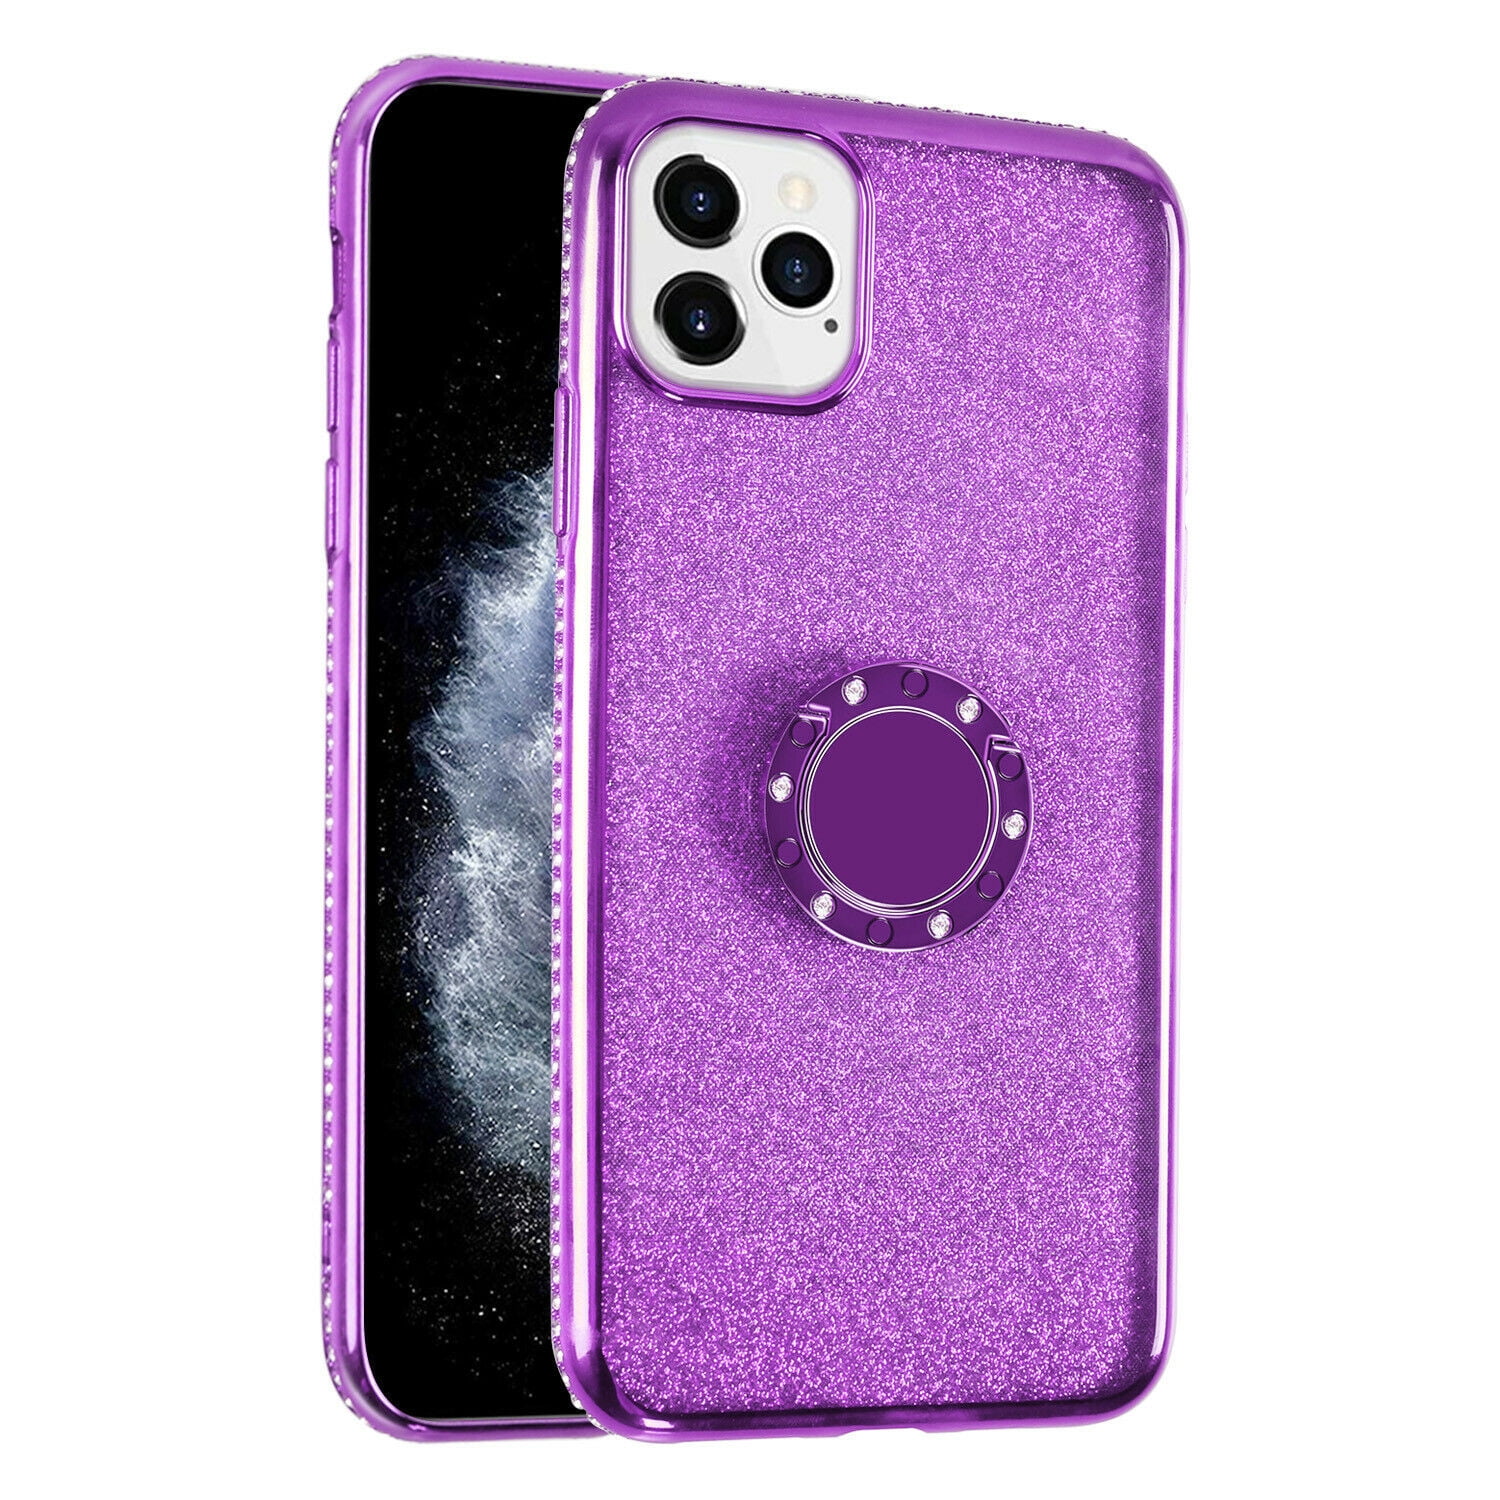 Goldcherry For Iphone 12 Pro Max 6 7 Inch Case Luxury Phone Case Cover W Ring Stand Glitter Rhinestone Bumper Protective Tpu Phone Cover For Apple Iphone 12 Pro Max 6 7 Inch Purple Walmart Com